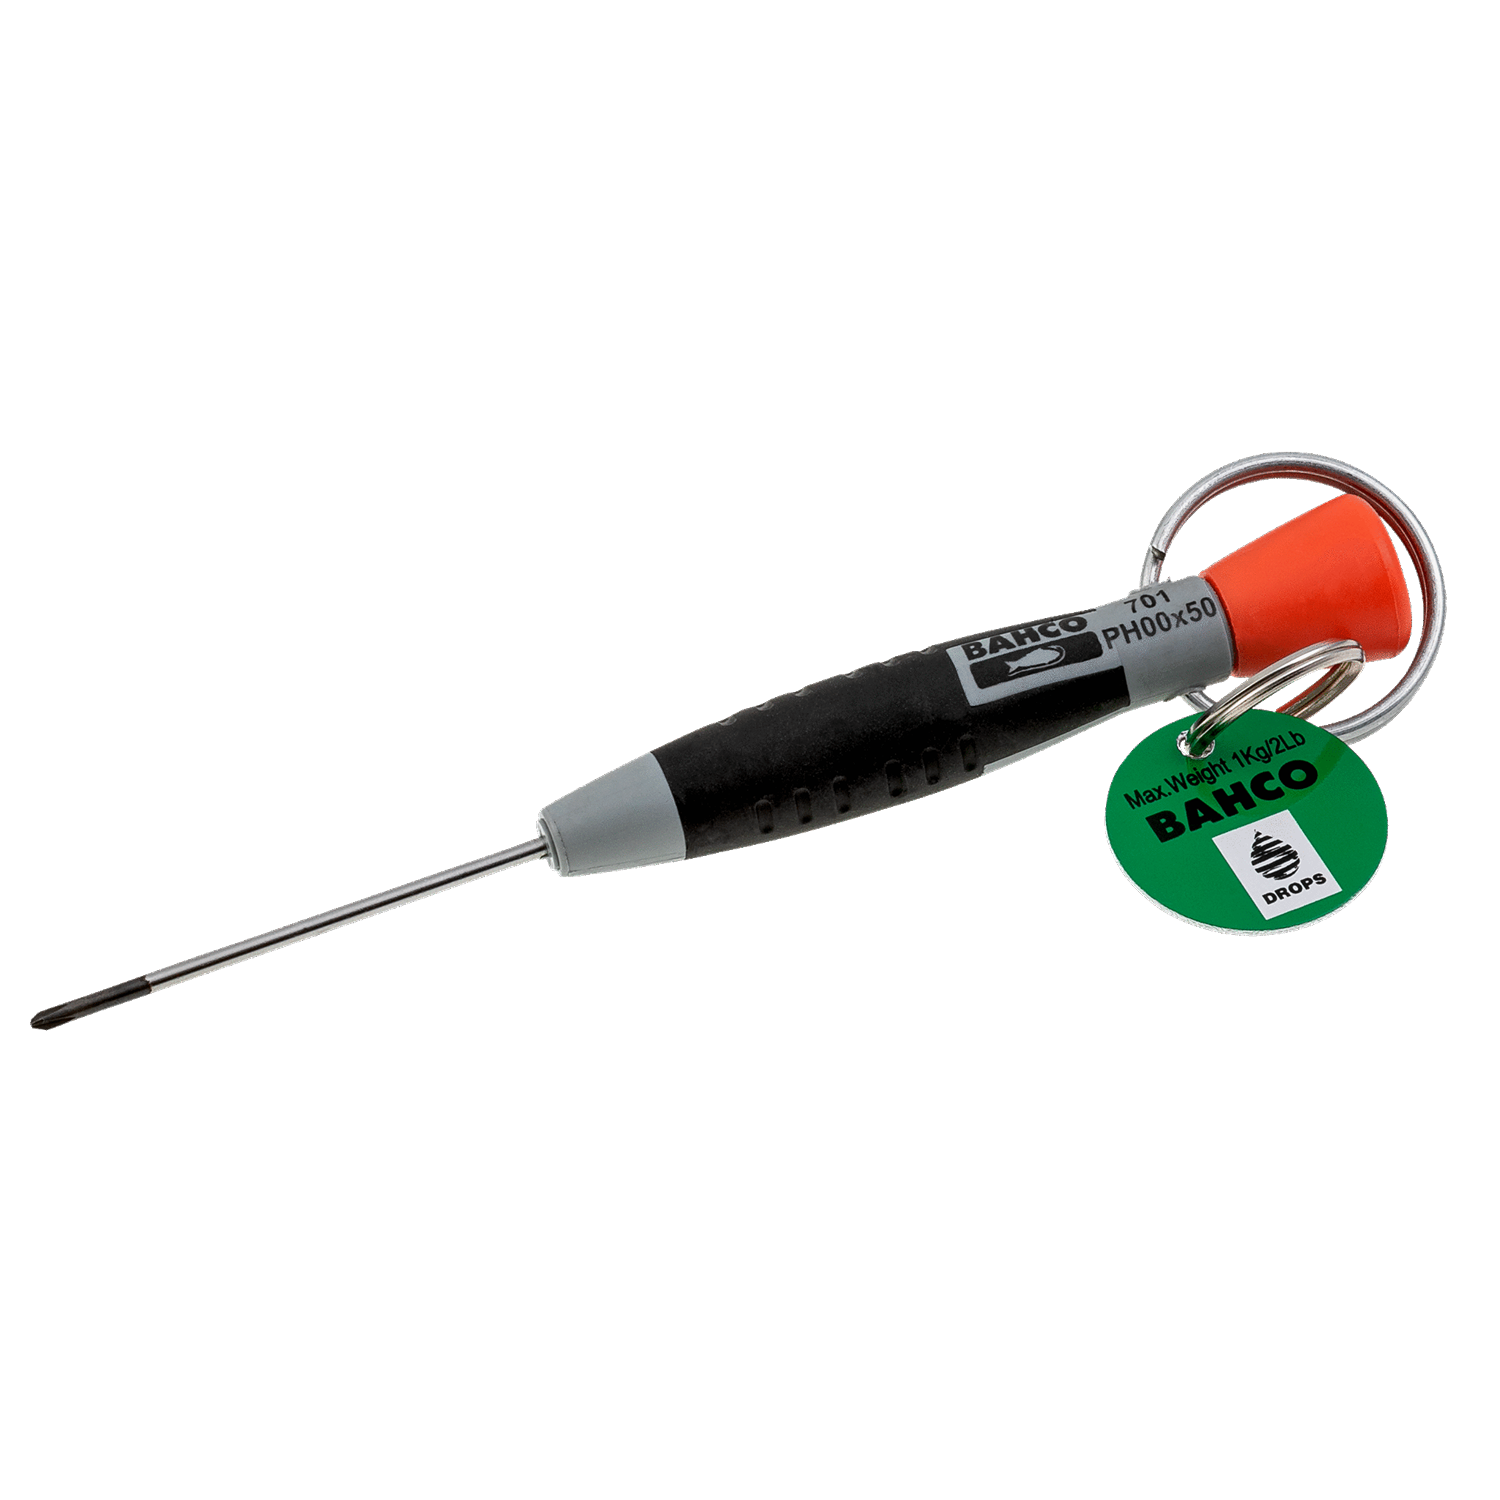 BAHCO TAH701 Phillips Screwdriver with Precision Grip PH00-PH1 - Premium Phillips Screwdriver from BAHCO - Shop now at Yew Aik.